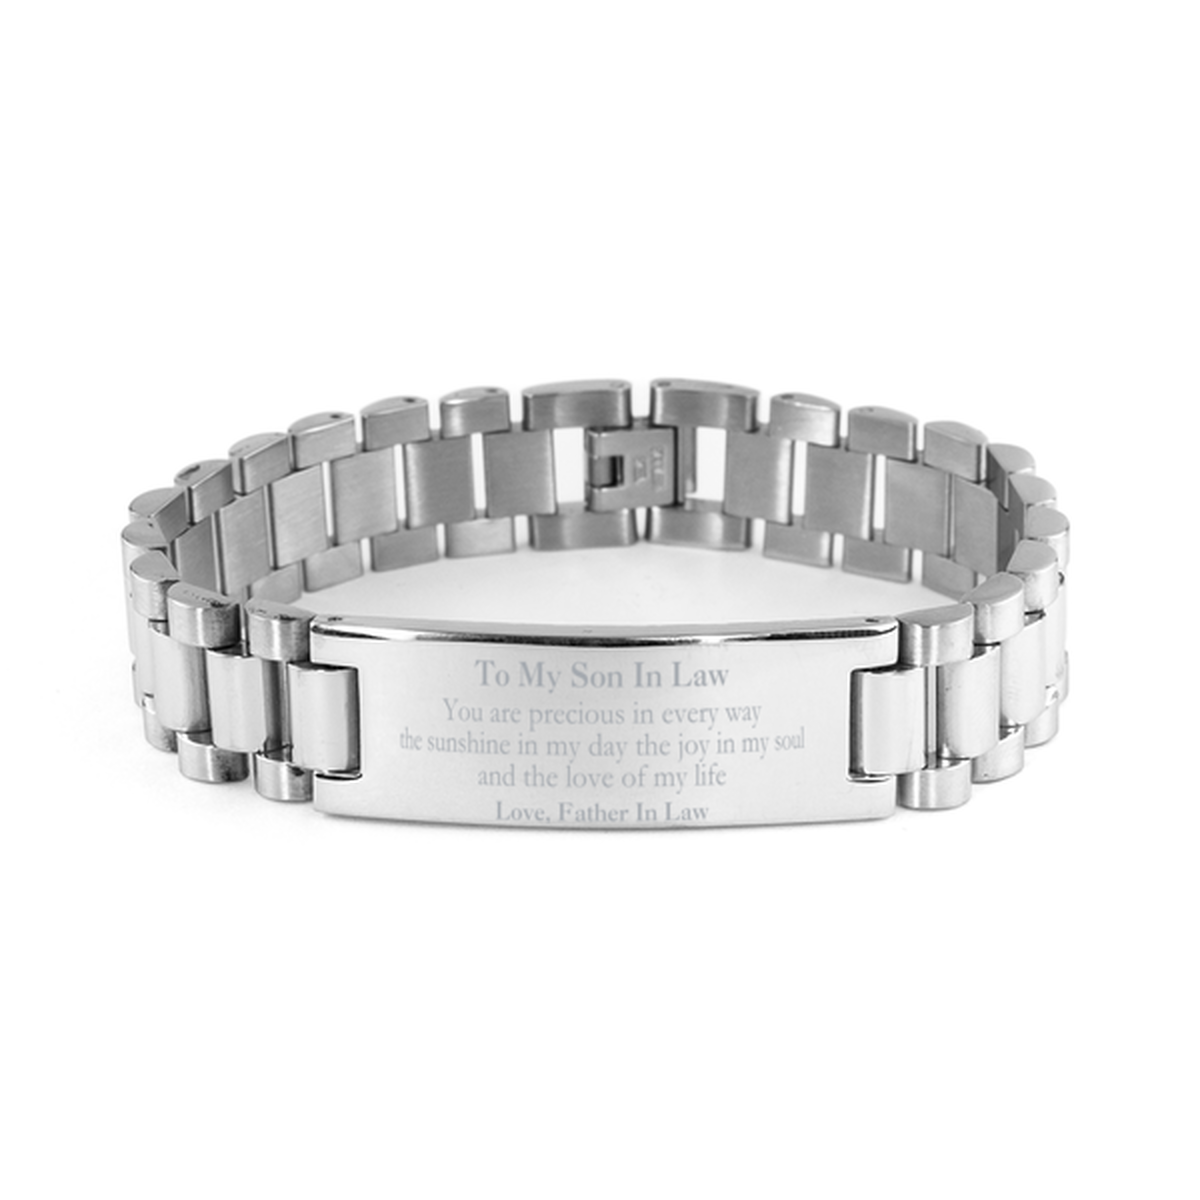 Graduation Gifts for Son In Law Ladder Stainless Steel Bracelet Present from Father In Law, Christmas Son In Law Birthday Gifts Son In Law You are precious in every way the sunshine in my day. Love, Father In Law